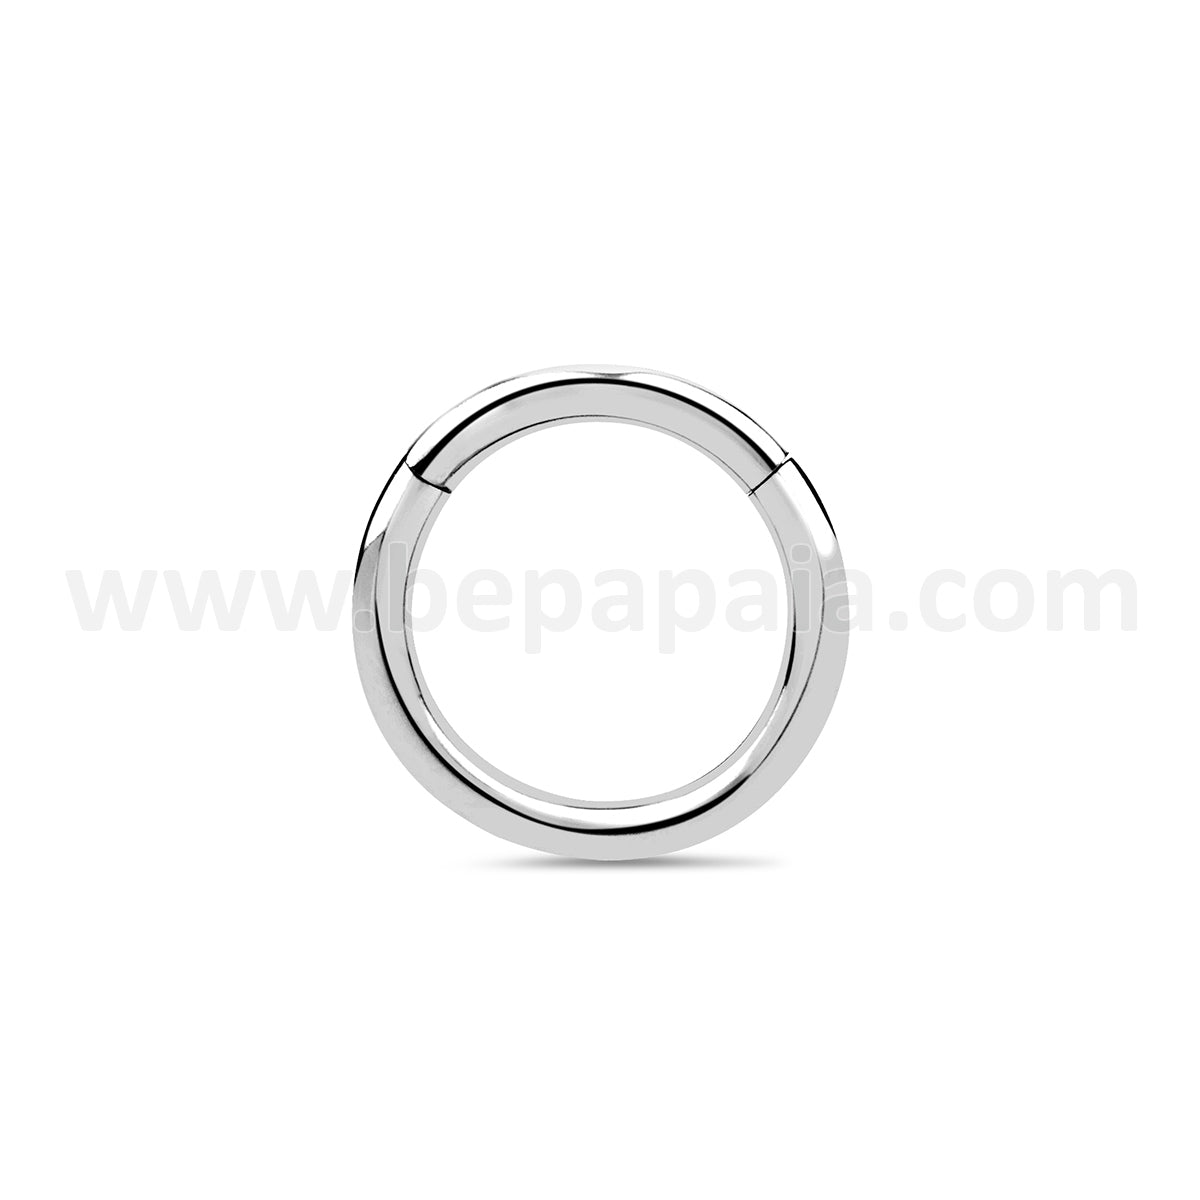 Surgical steel hinged segment ring 1.2x8,10mm